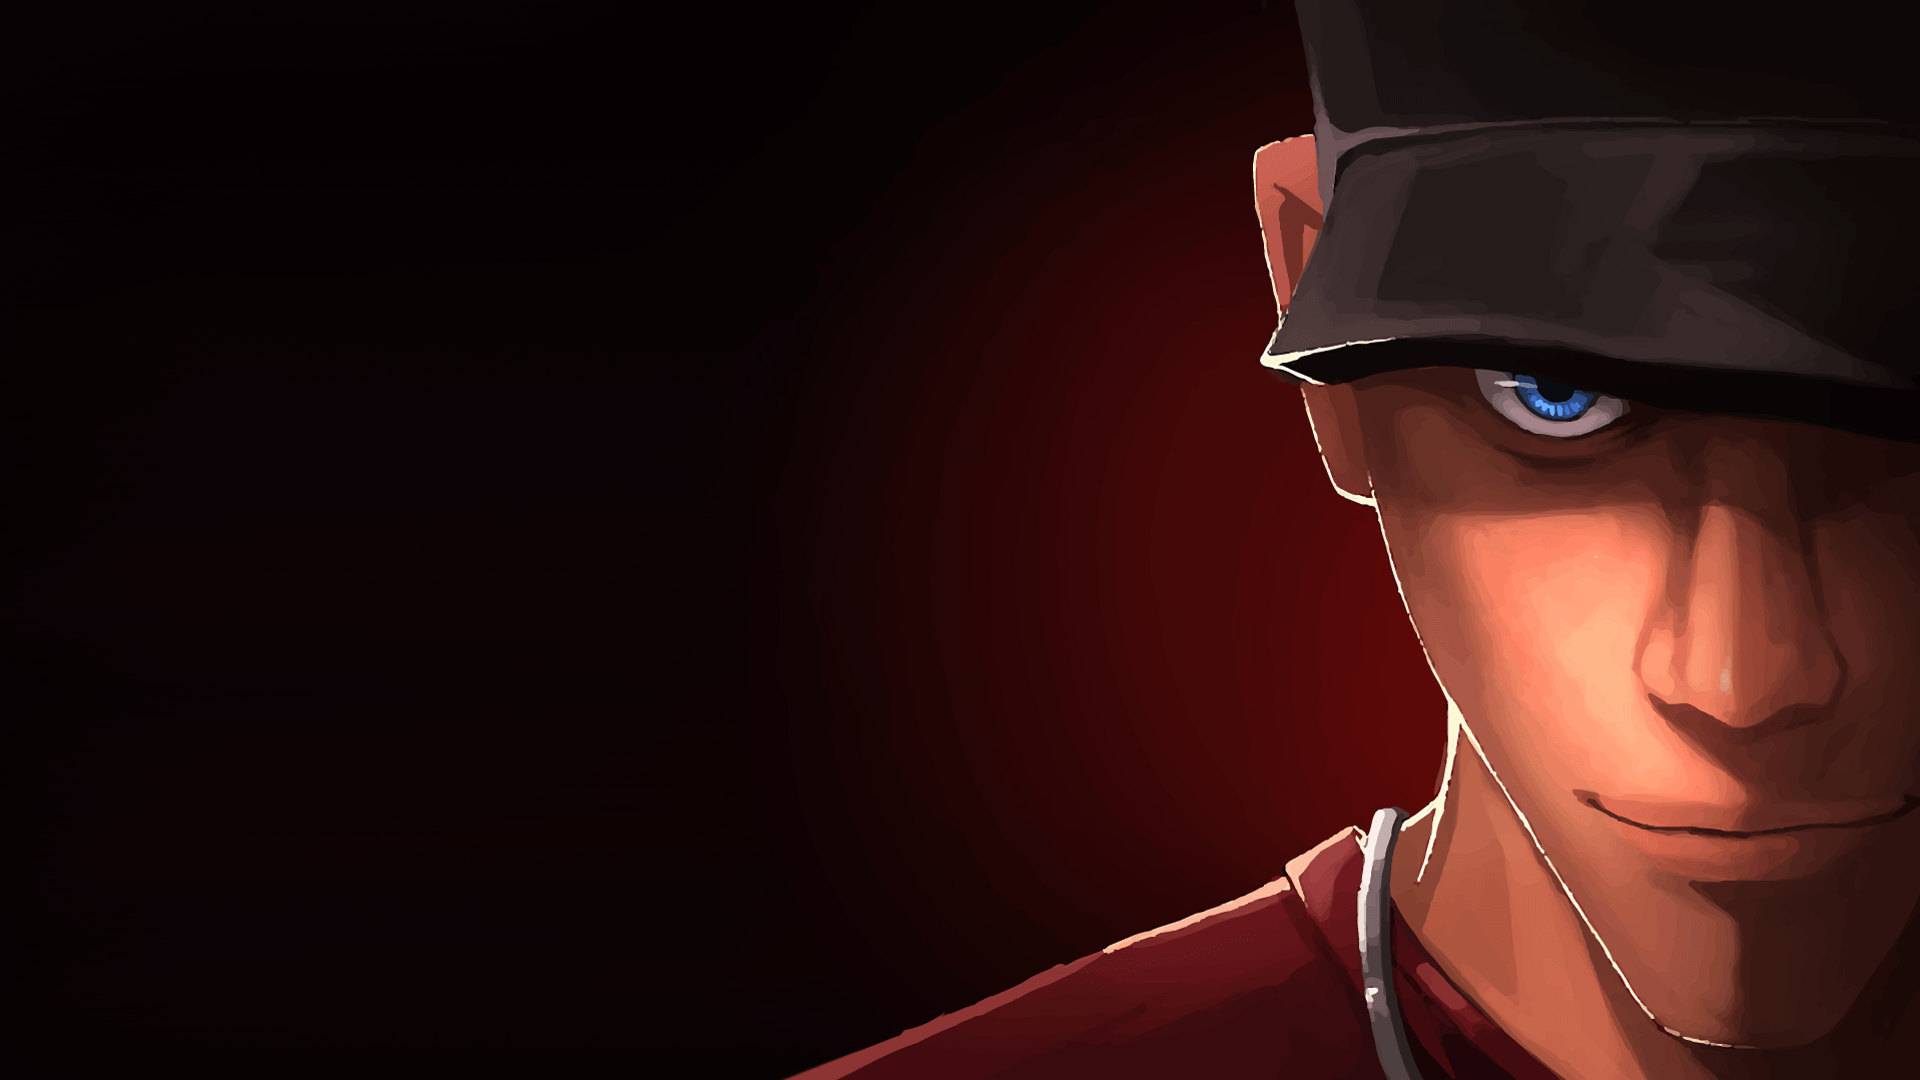 Tf2 Scout Wallpaper. Team fortress 2